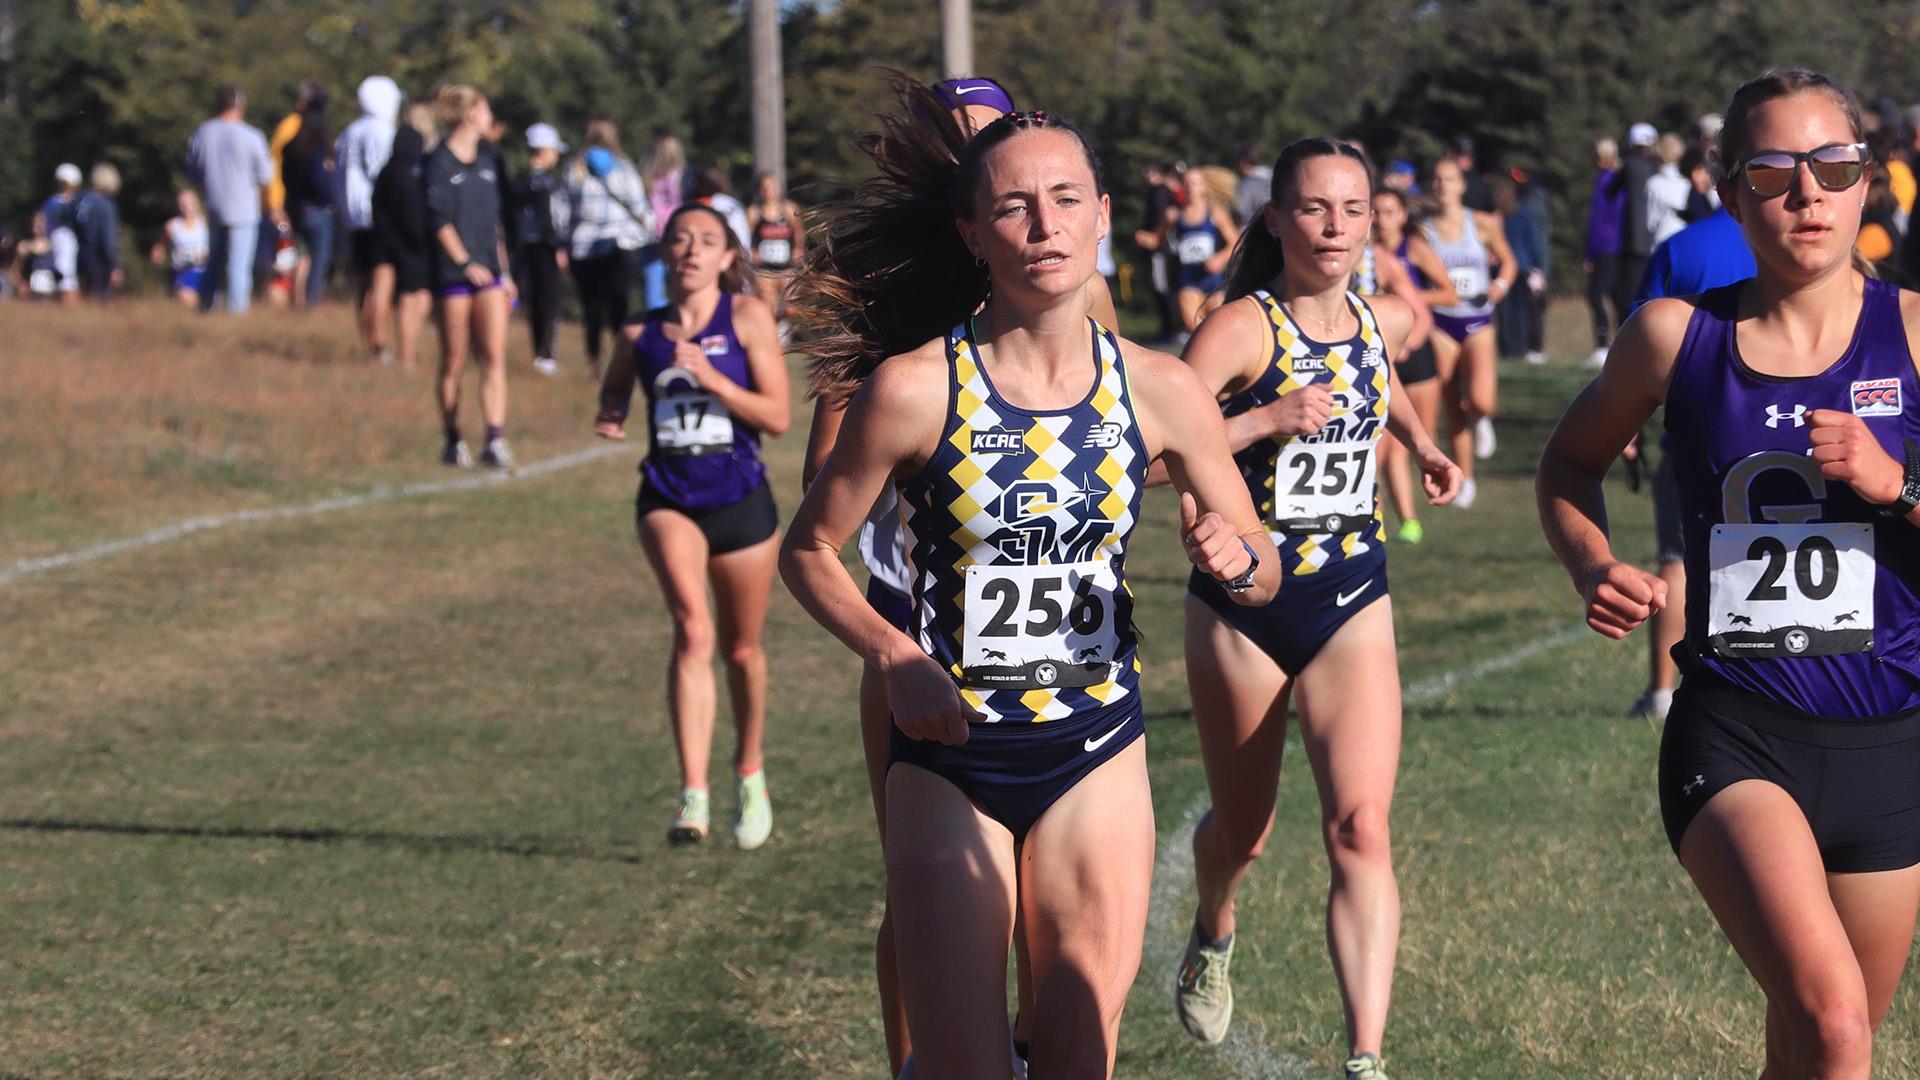 Spires Take Second at Blazing Tiger NAIA Classic